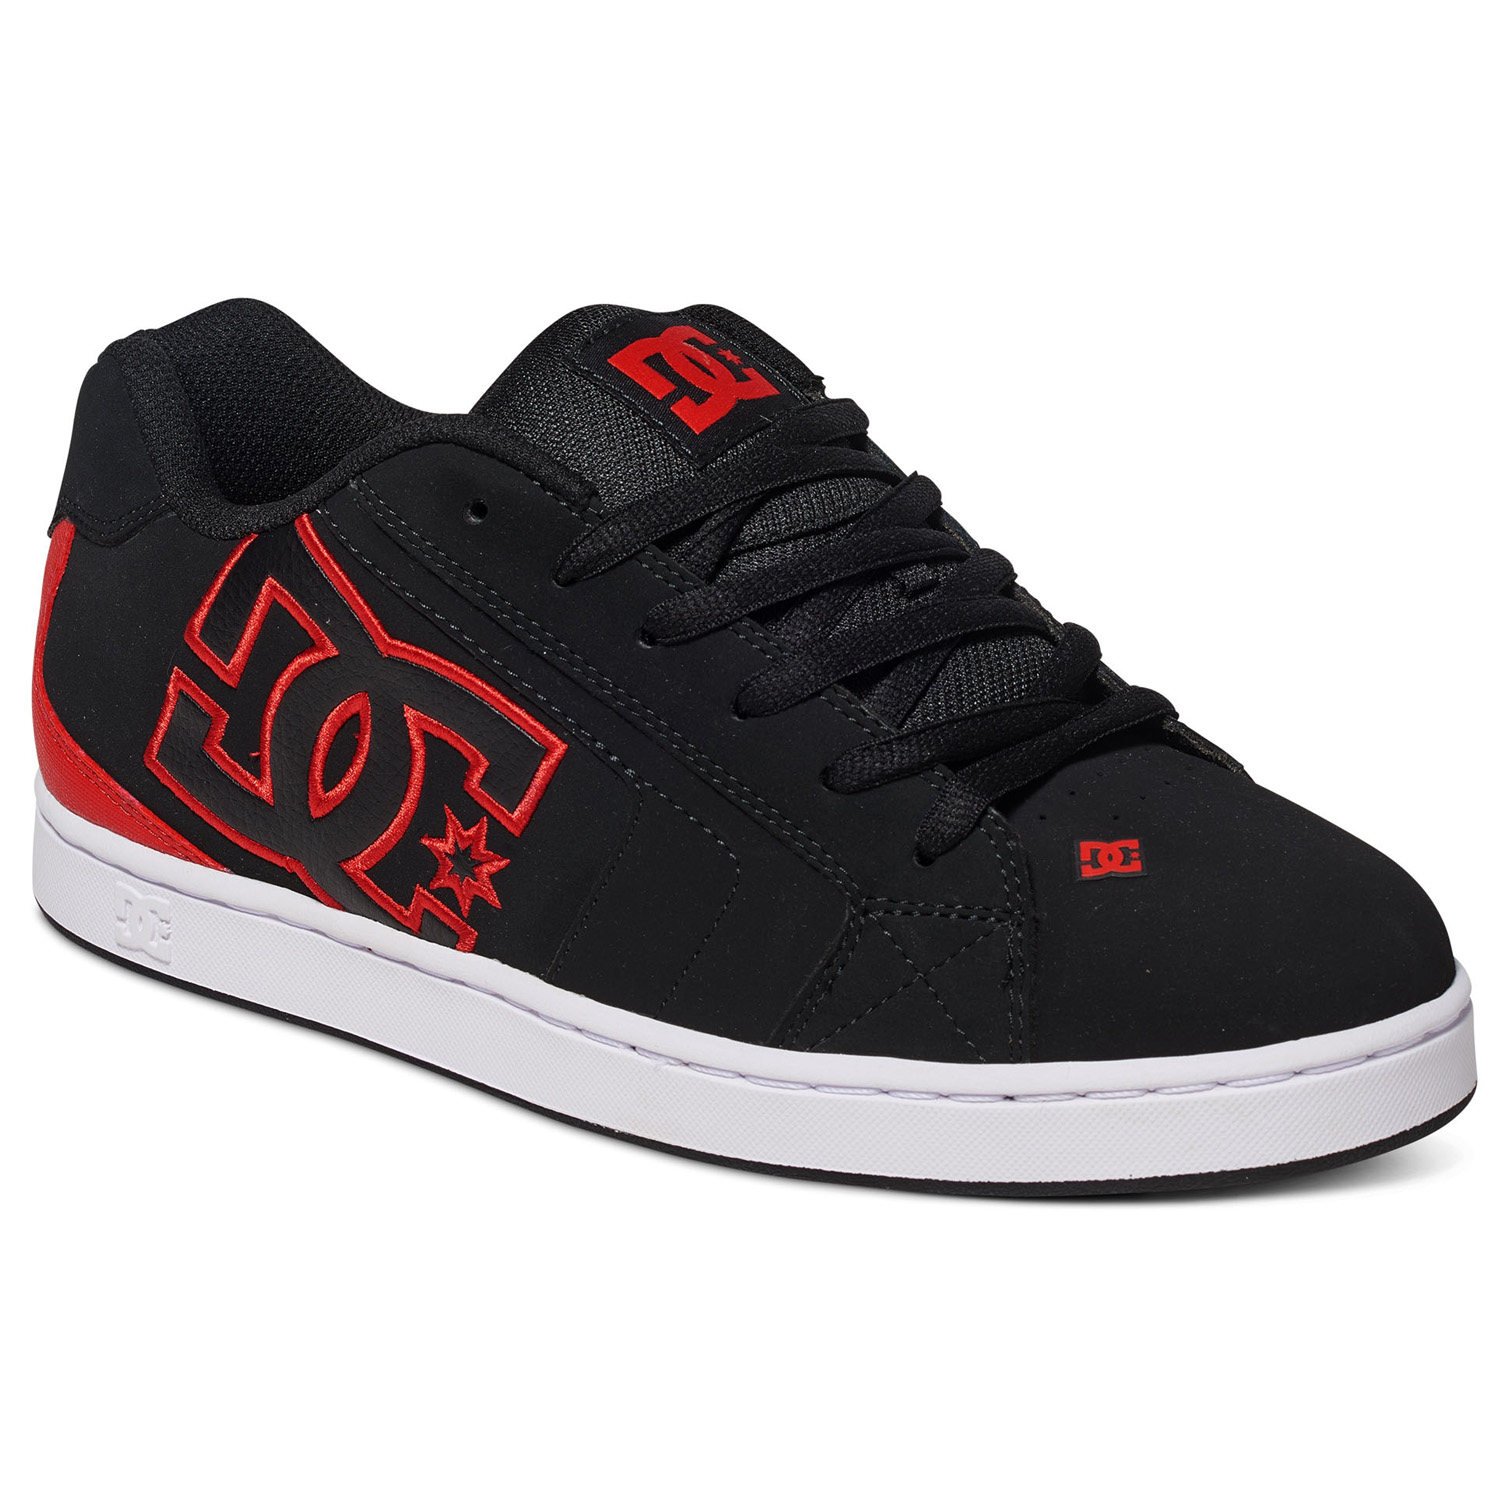 DC Shoes Net Black/Red